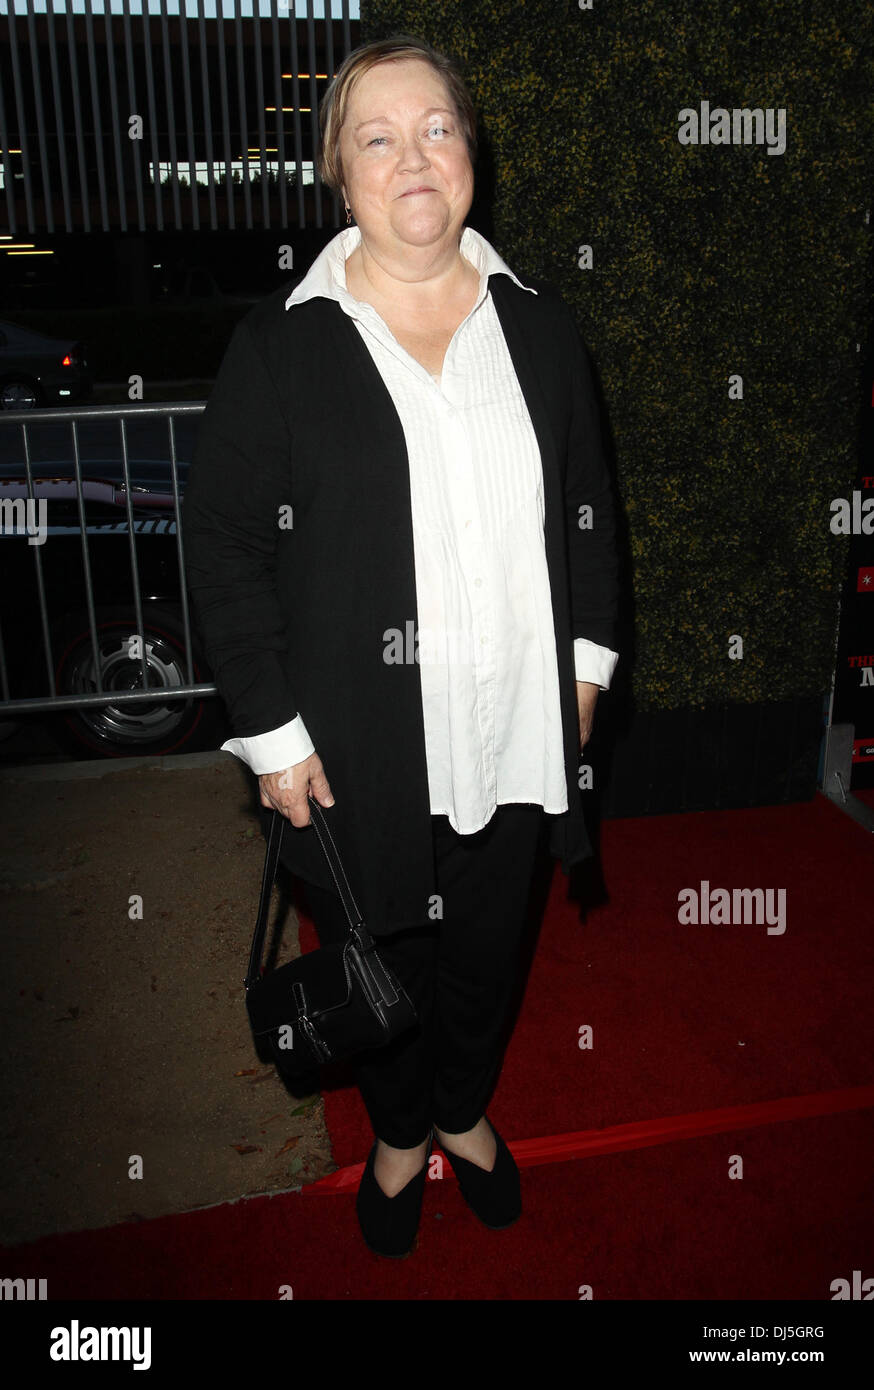 Kathy Kinney The Los Angeles premiere of 'For The Love Of Money' held at The Writers Guild Theater Beverly Hills, California - 05.06.12 Stock Photo